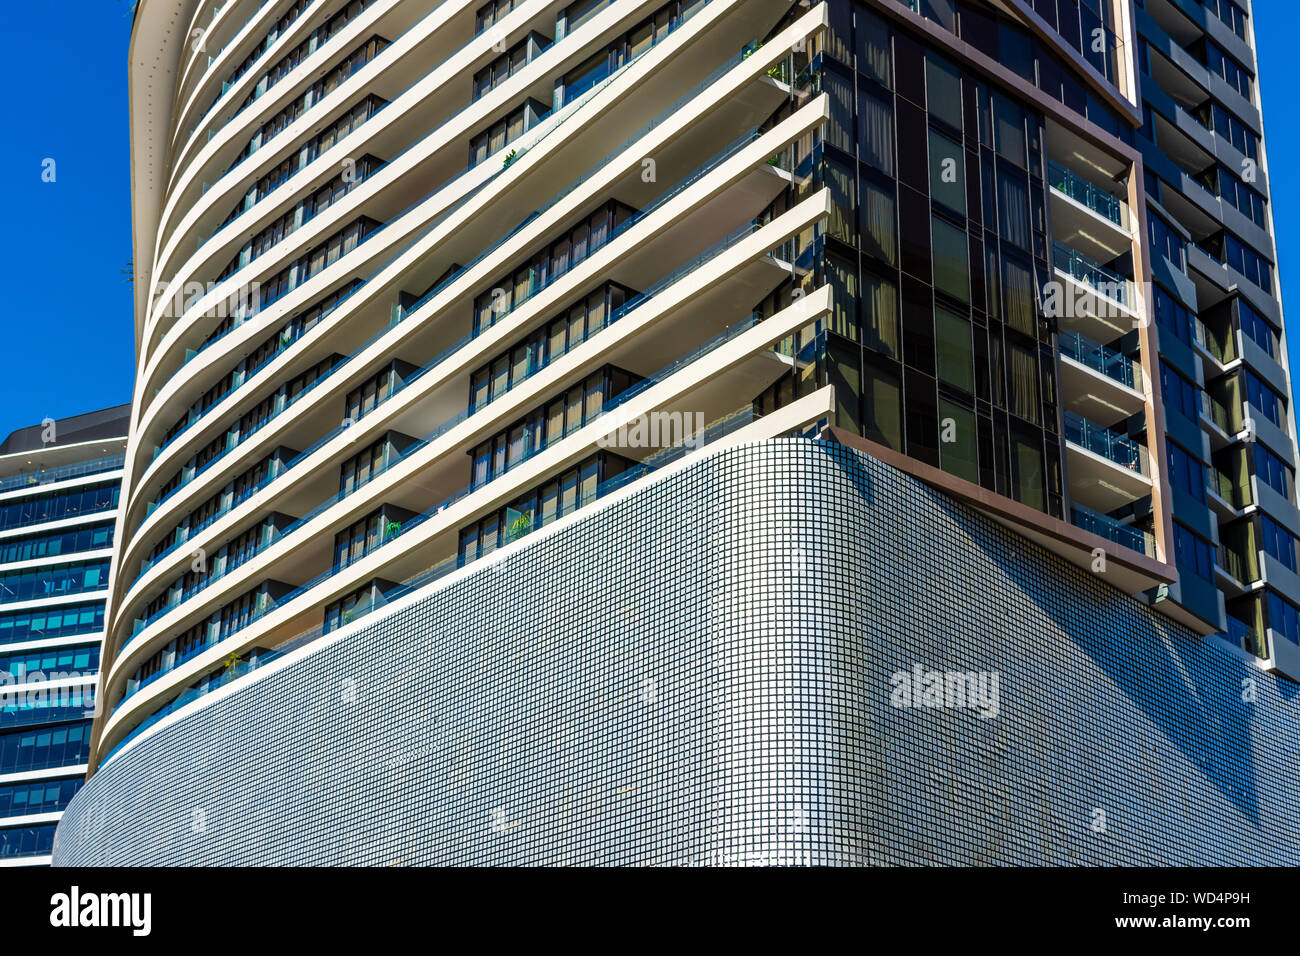 A Closeup of an Apartment Building in the City of Brisbane Australia Stock Photo